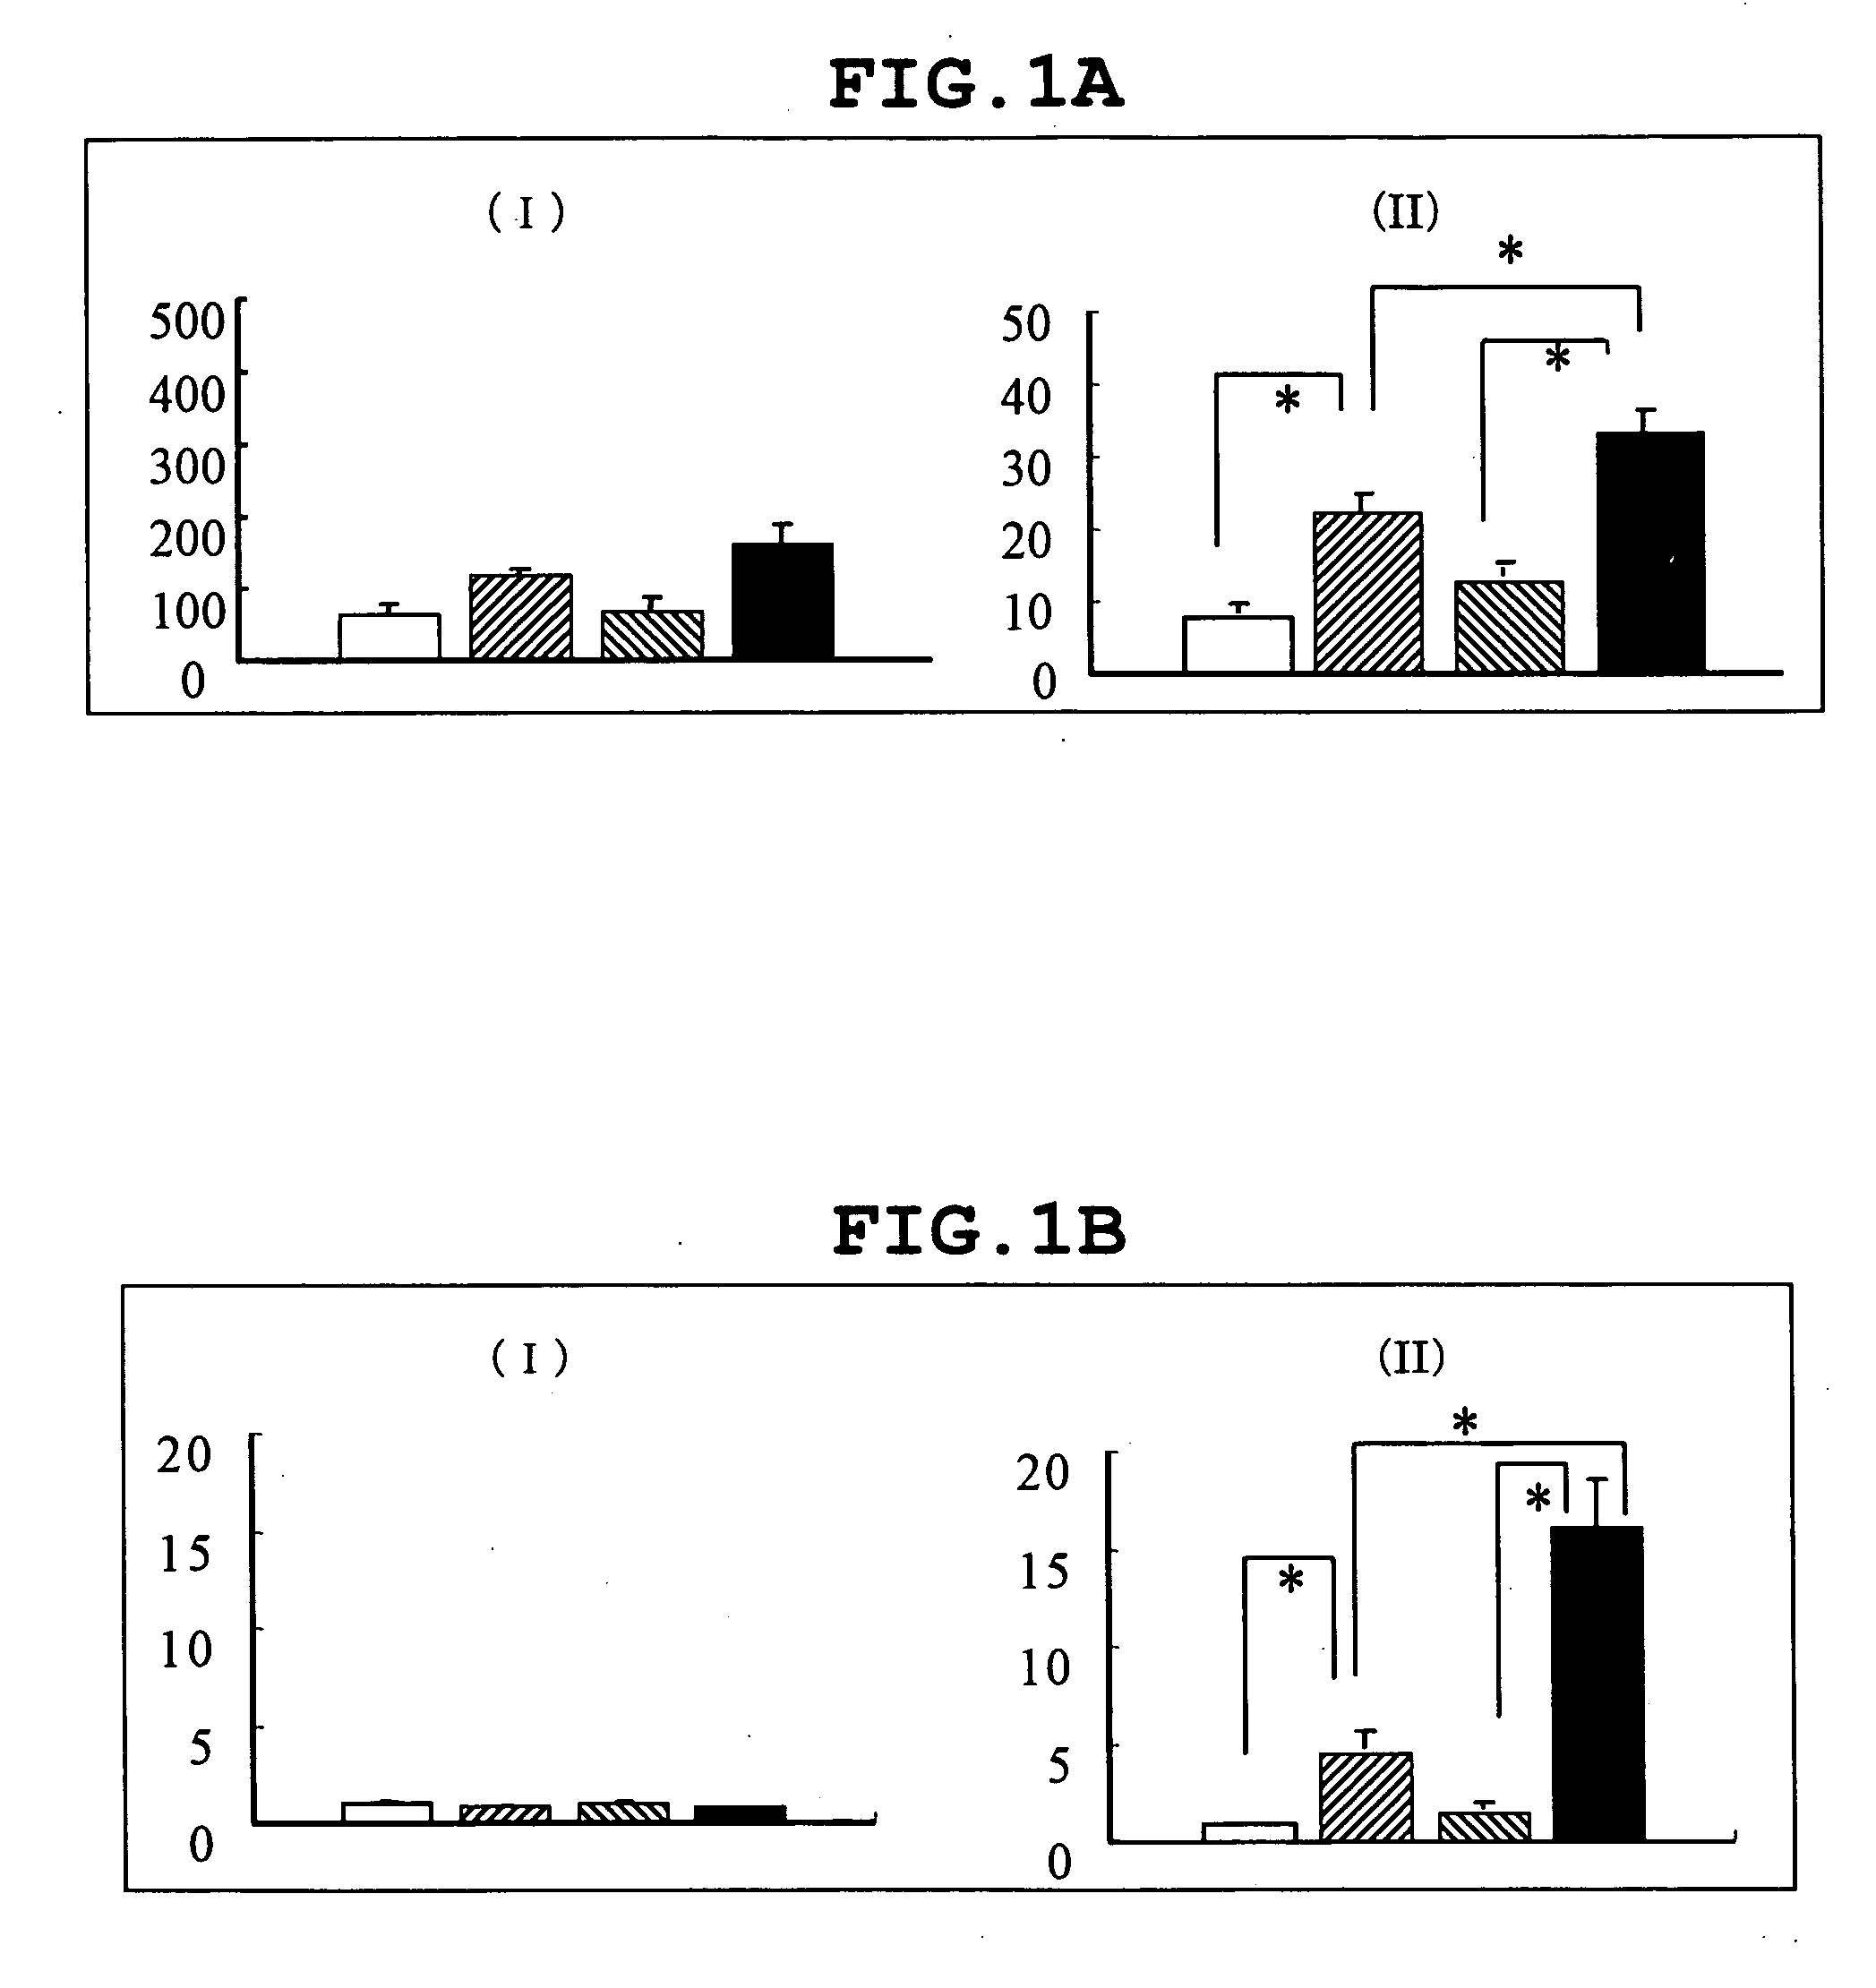 Cis-element regulating transcription, transcriptional regulatory factor binding specifically thereto and use of the same